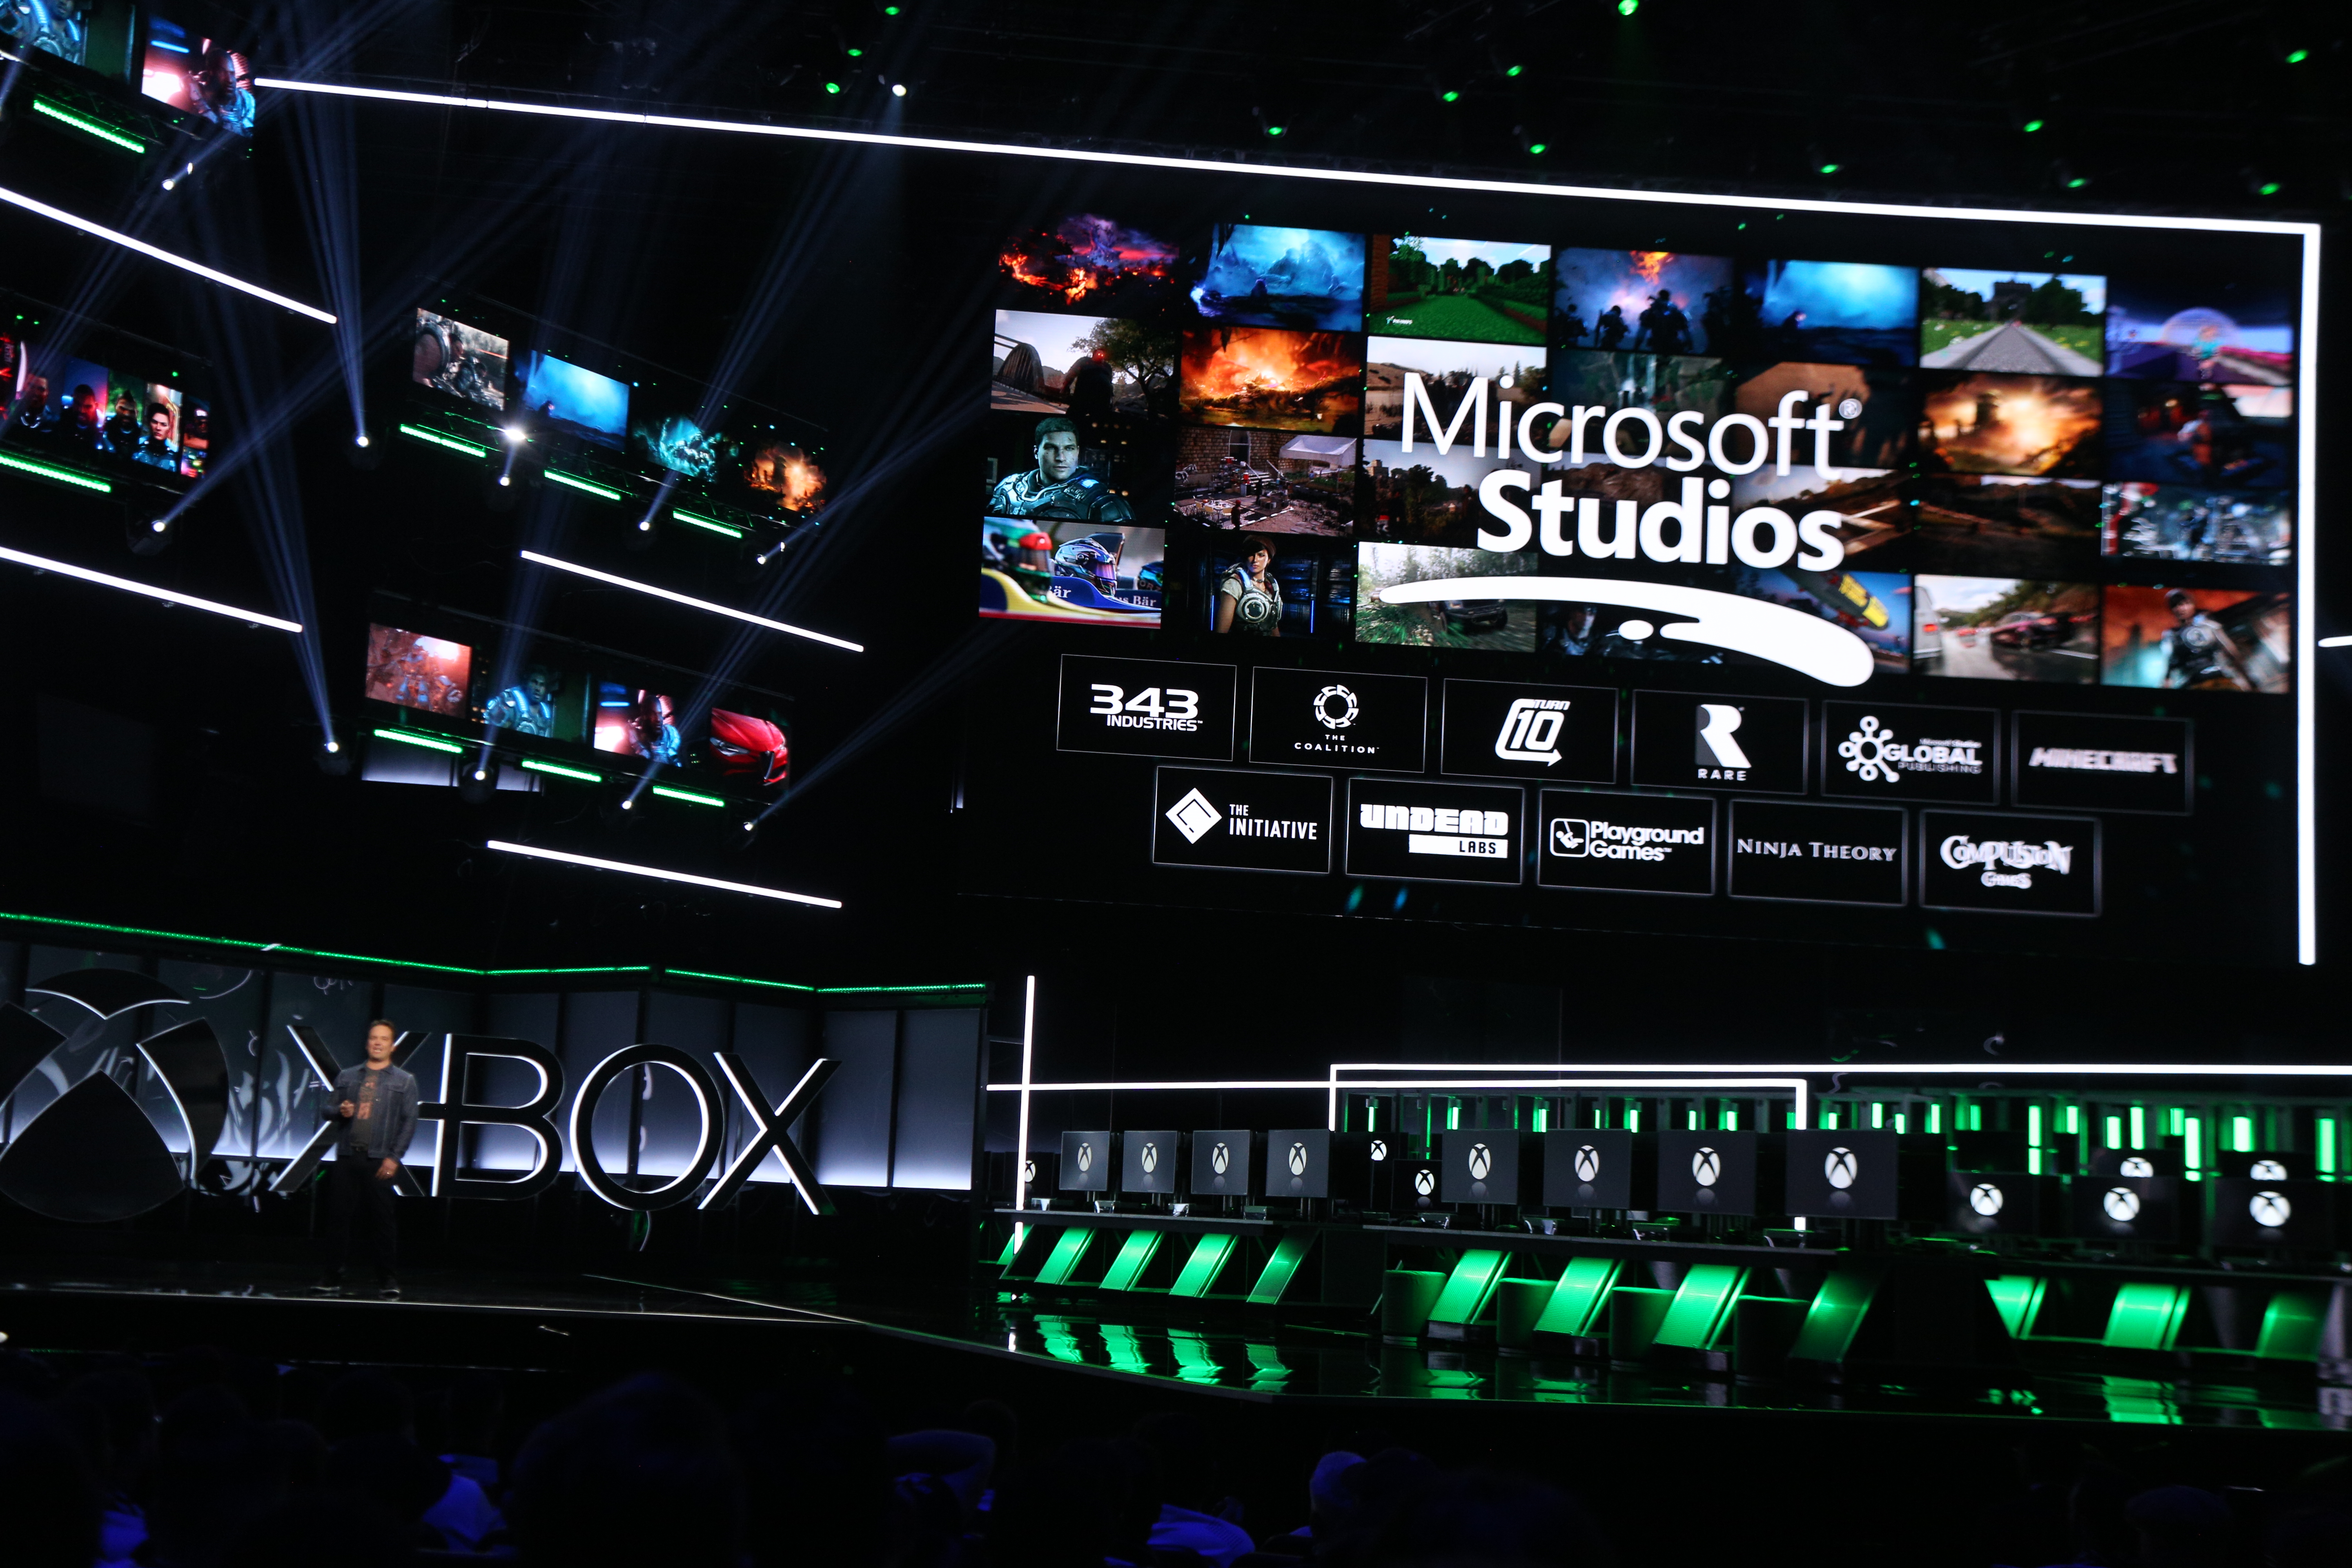 All Xbox First Party Game Studios. - XBOX GAME STUDIOS 343